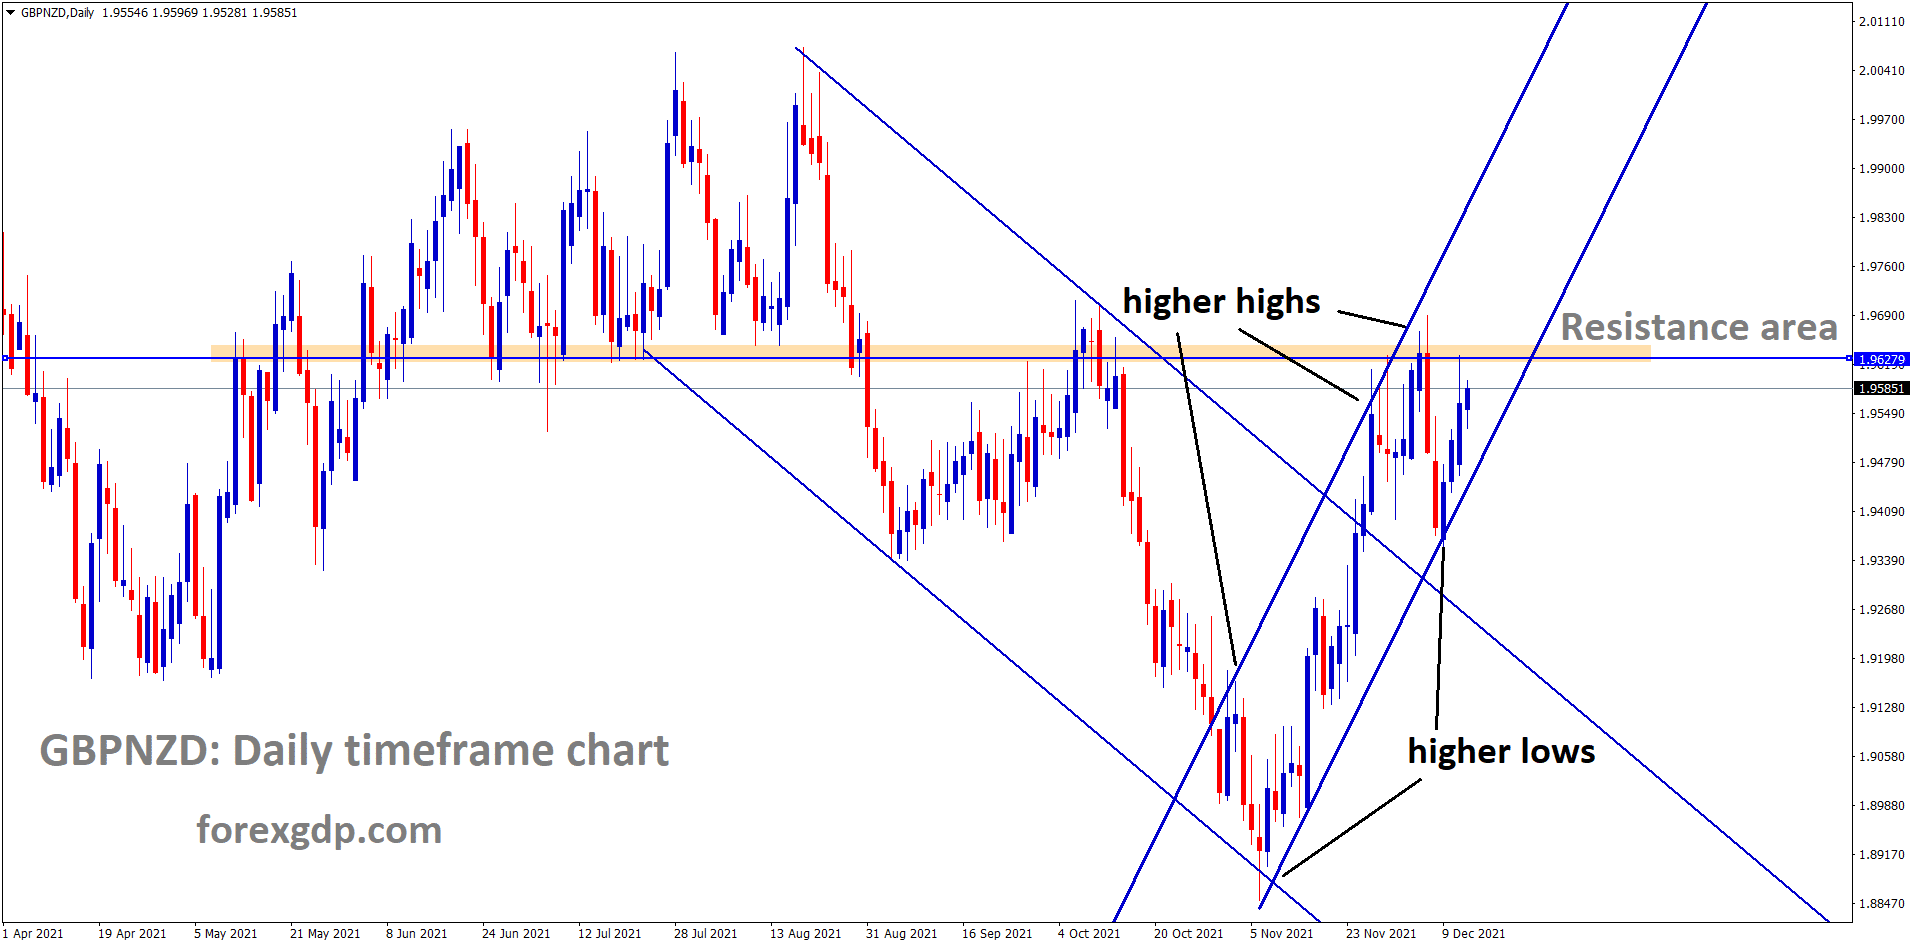 GBPNZD is moving in an Ascending channel and the market reached the previous resistance area of the channel